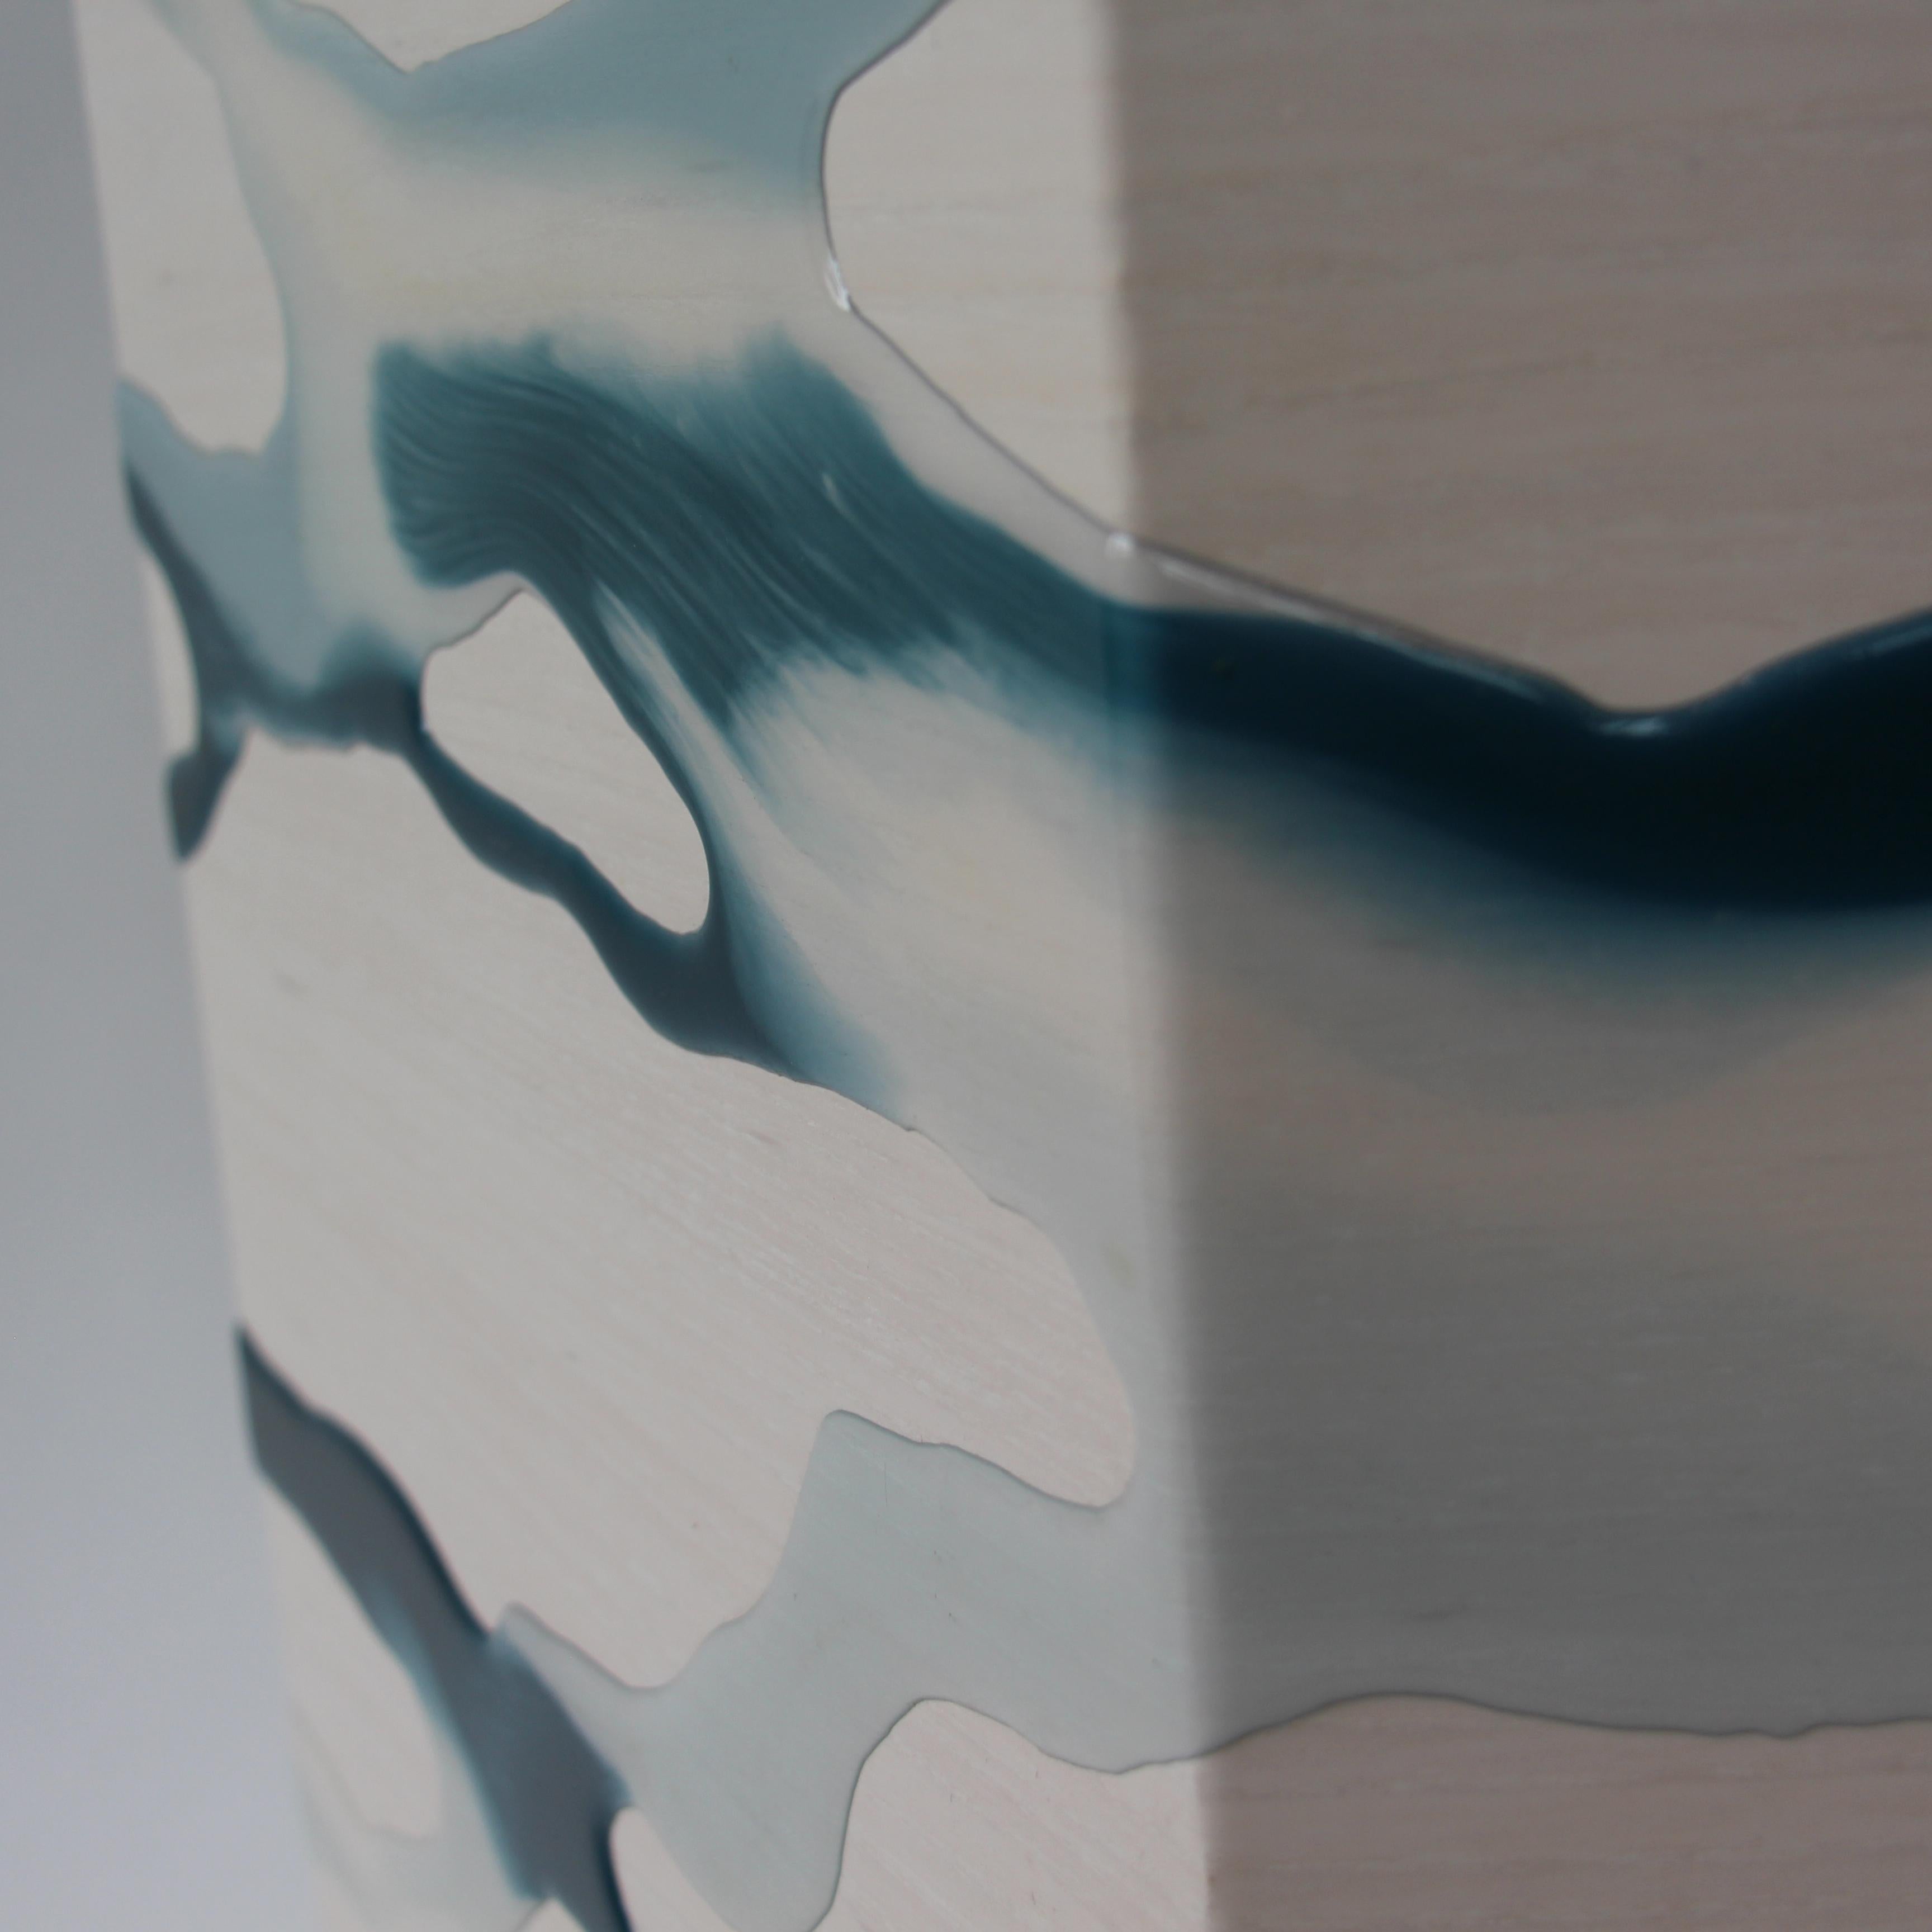 The drip/fold side table by Noble Goods is constructed of a single sheet of whitened ash plywood that has been hand-dripped with liquid resin, then bent into a hexagonal shape. 

This unique resin colorway has subtle tones of blue, teal and black,